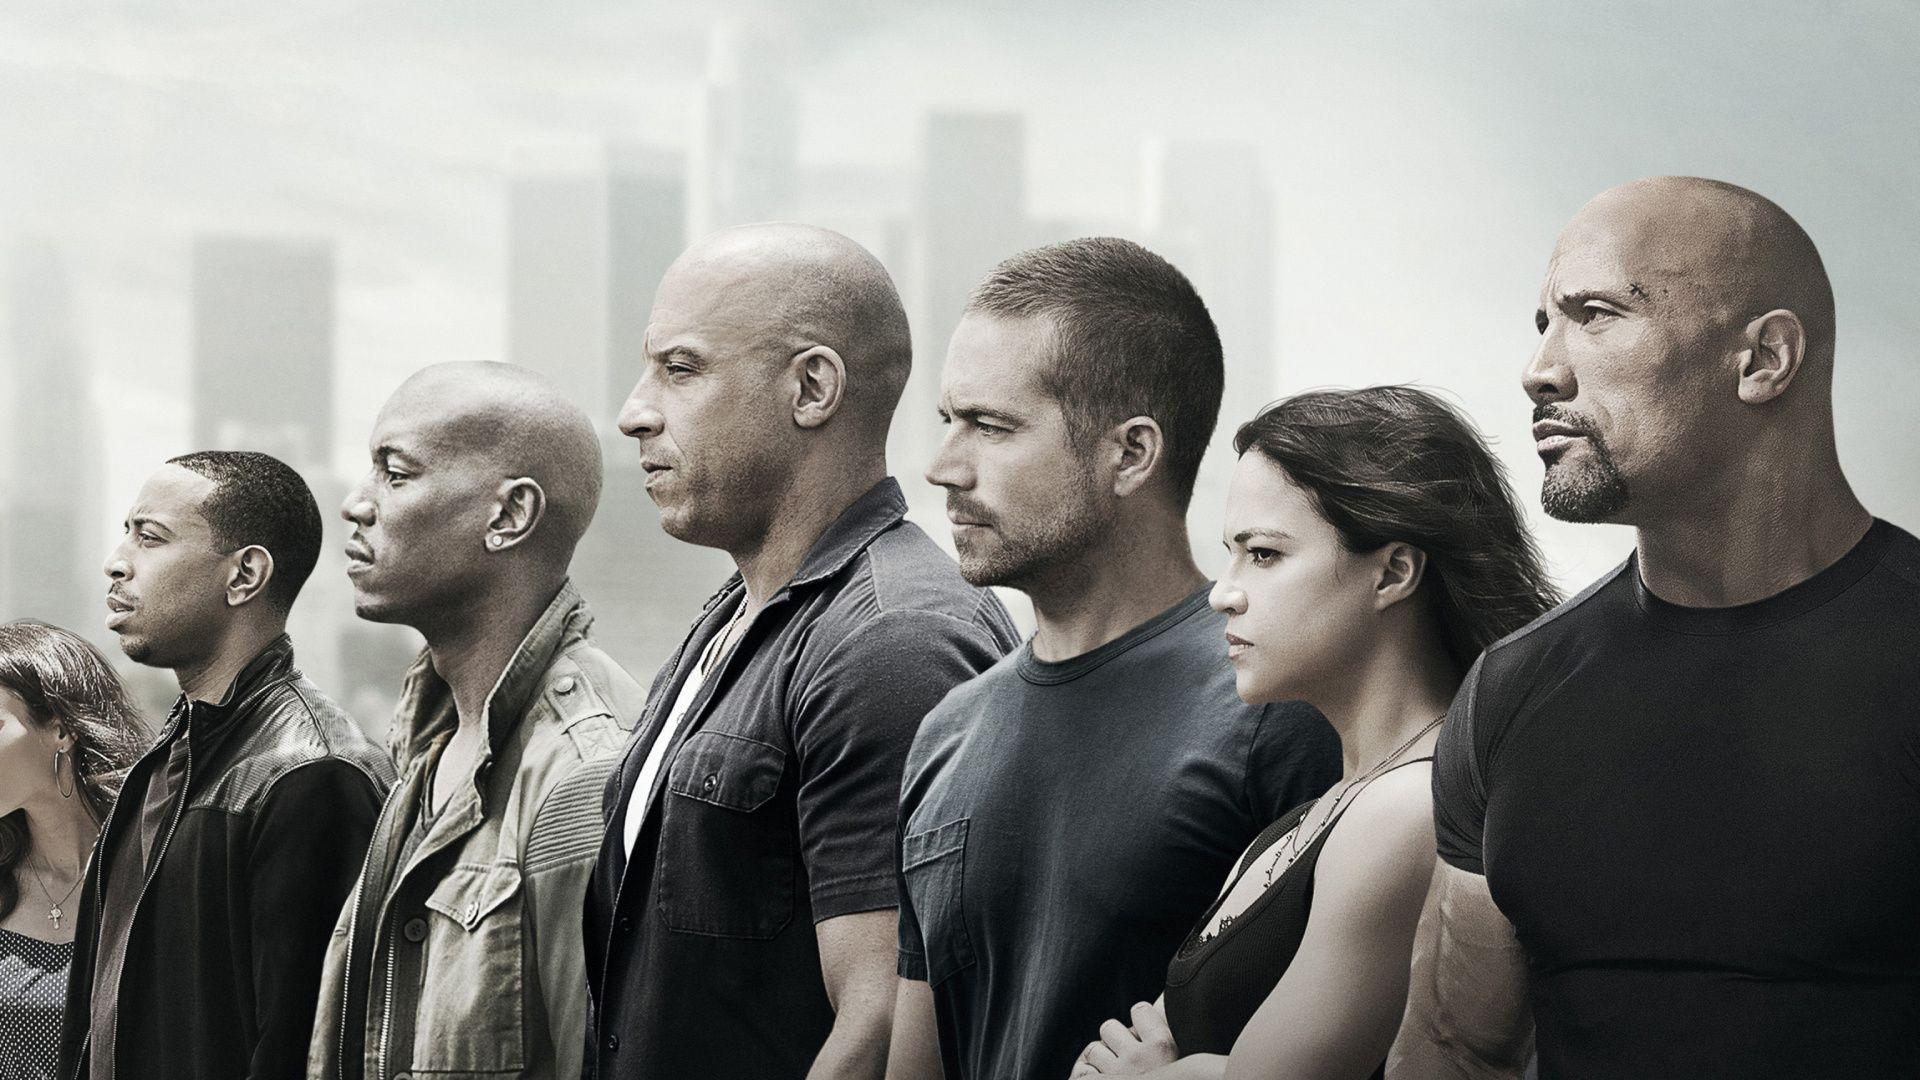 Fast and Furious 7 Wallpapers for Desktop 1920x1080 Full HD